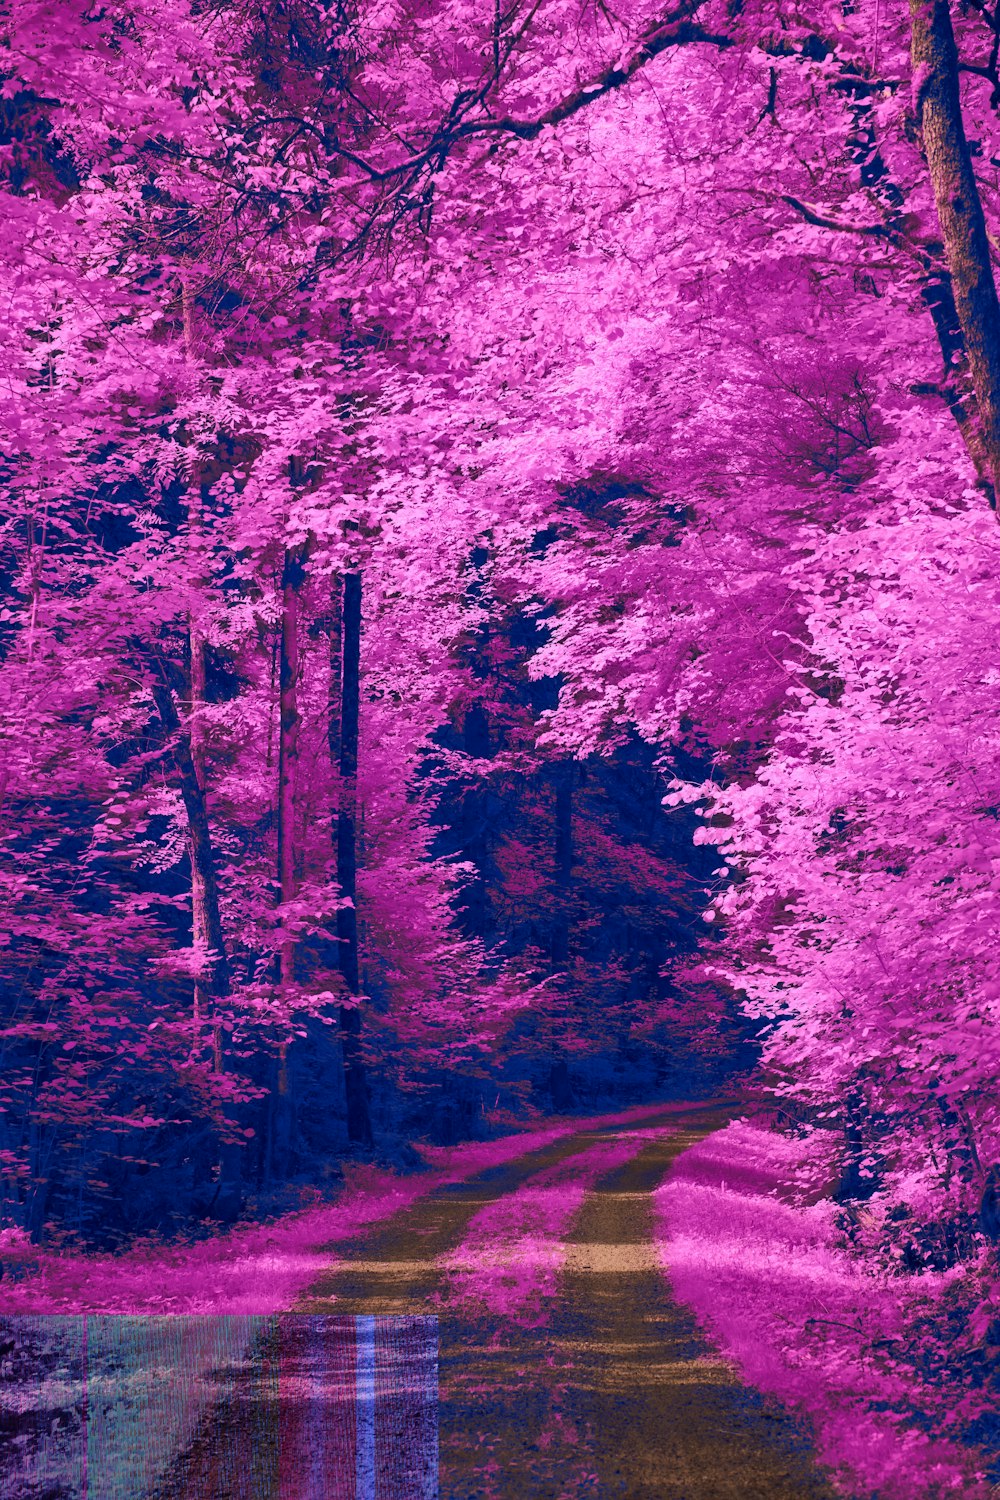 a road in the middle of a pink forest